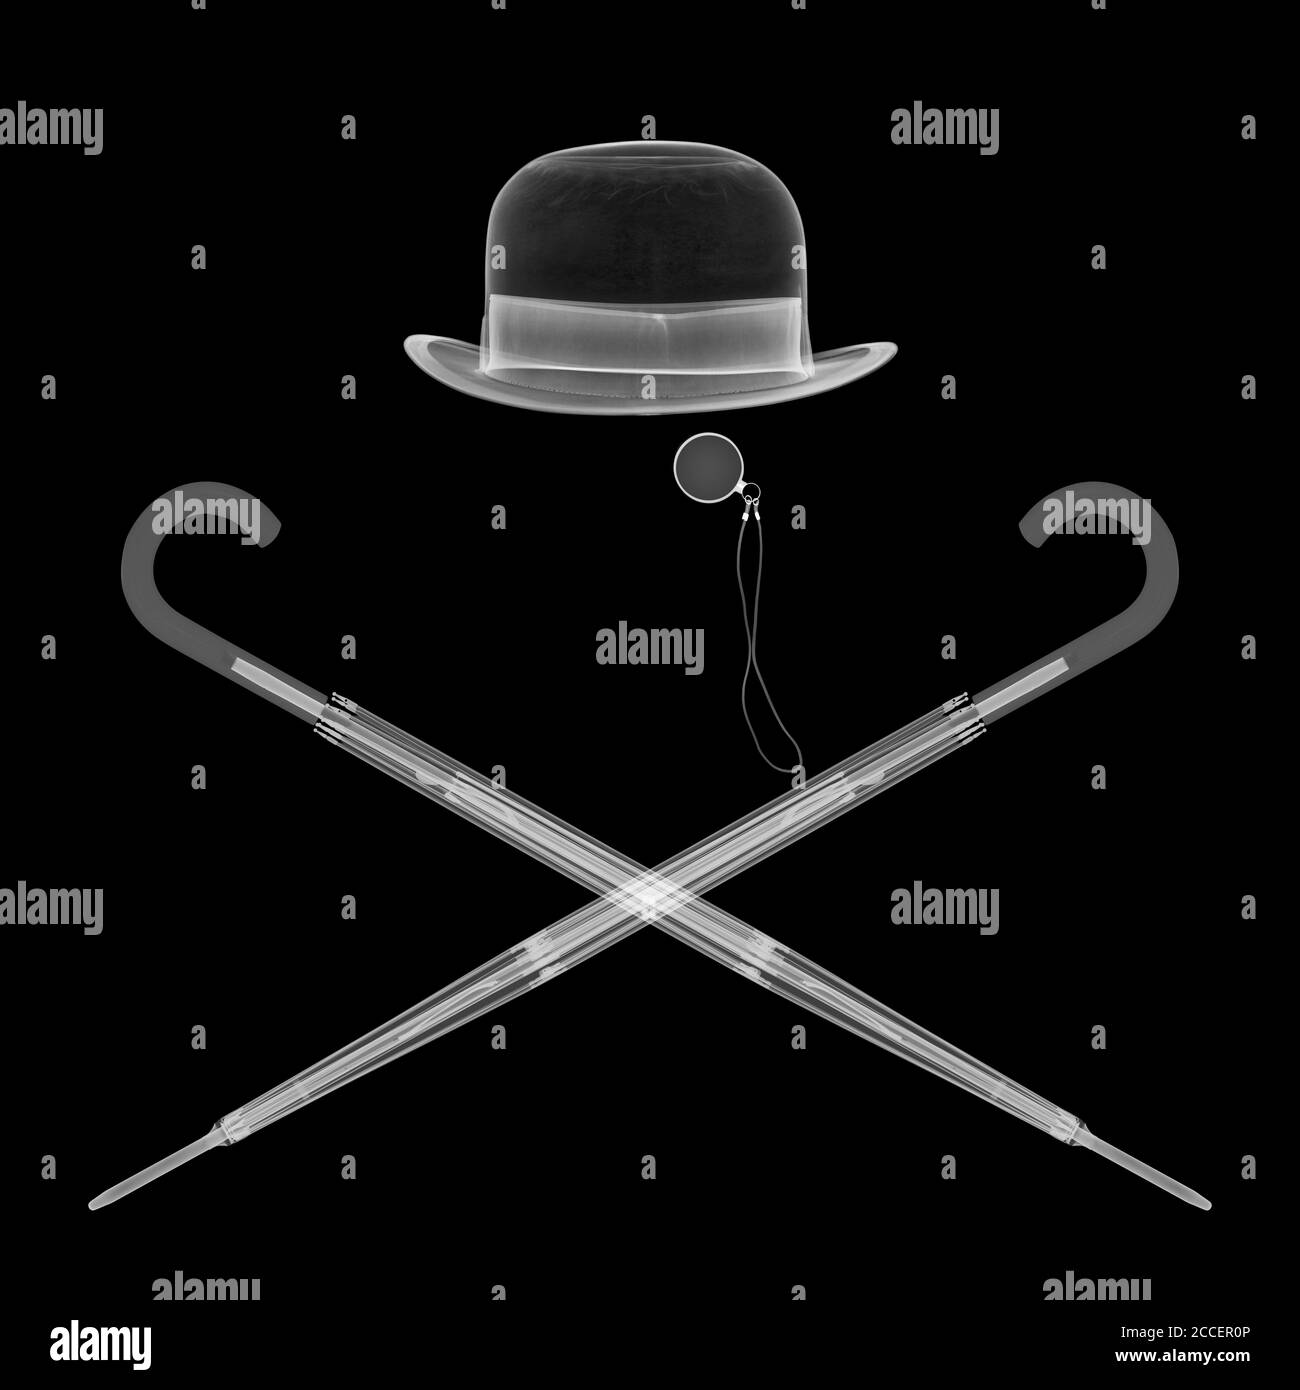 Bowler hat monocle and two umbrellas, X-ray Stock Photo